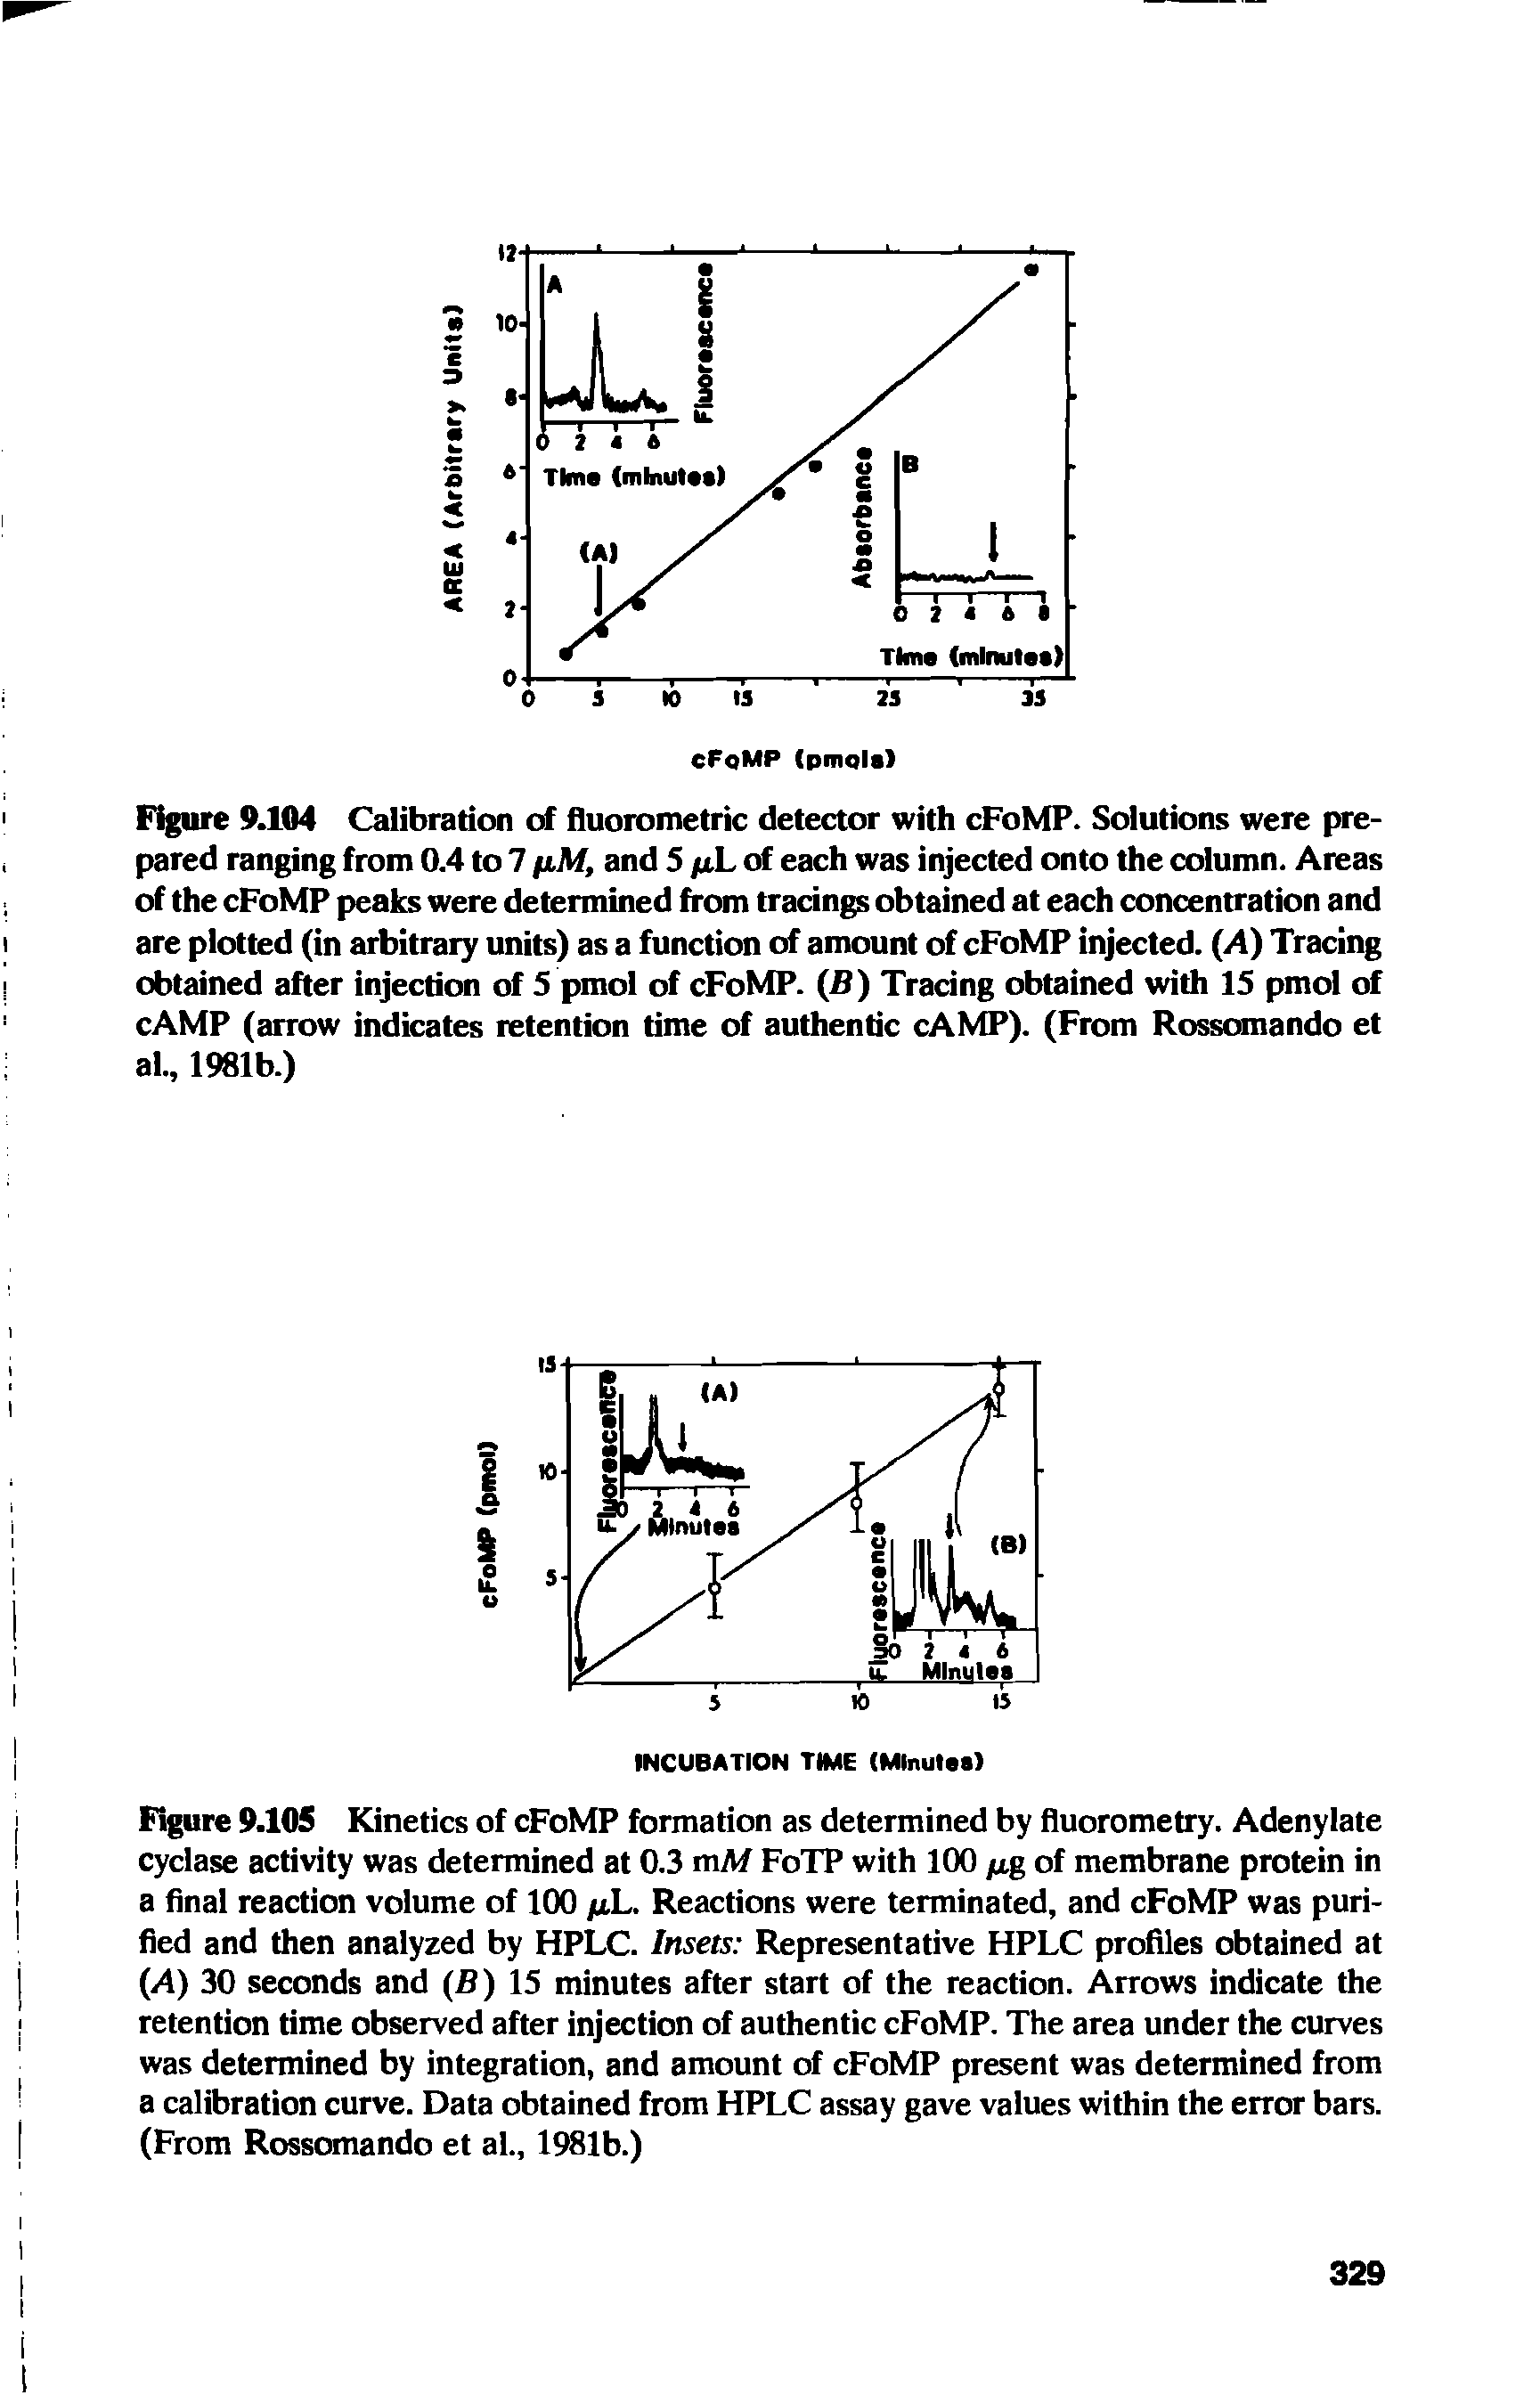 Figure 9.105 Kinetics of cFoMP formation as determined by fluorometry. Adenylate cyclase activity was determined at 0.3 mM FoTP with 100 jug of membrane protein in a final reaction volume of 100 yu.L. Reactions were terminated, and cFoMP was purified and then analyzed by HPLC. Insets Representative HPLC profiles obtained at (A) 30 seconds and (B) 15 minutes after start of the reaction. Arrows indicate the retention time observed after injection of authentic cFoMP. The area under the curves was determined by integration, and amount of cFoMP present was determined from a calibration curve. Data obtained from HPLC assay gave values within the error bars. (From Rossomando et al., 1981b.)...